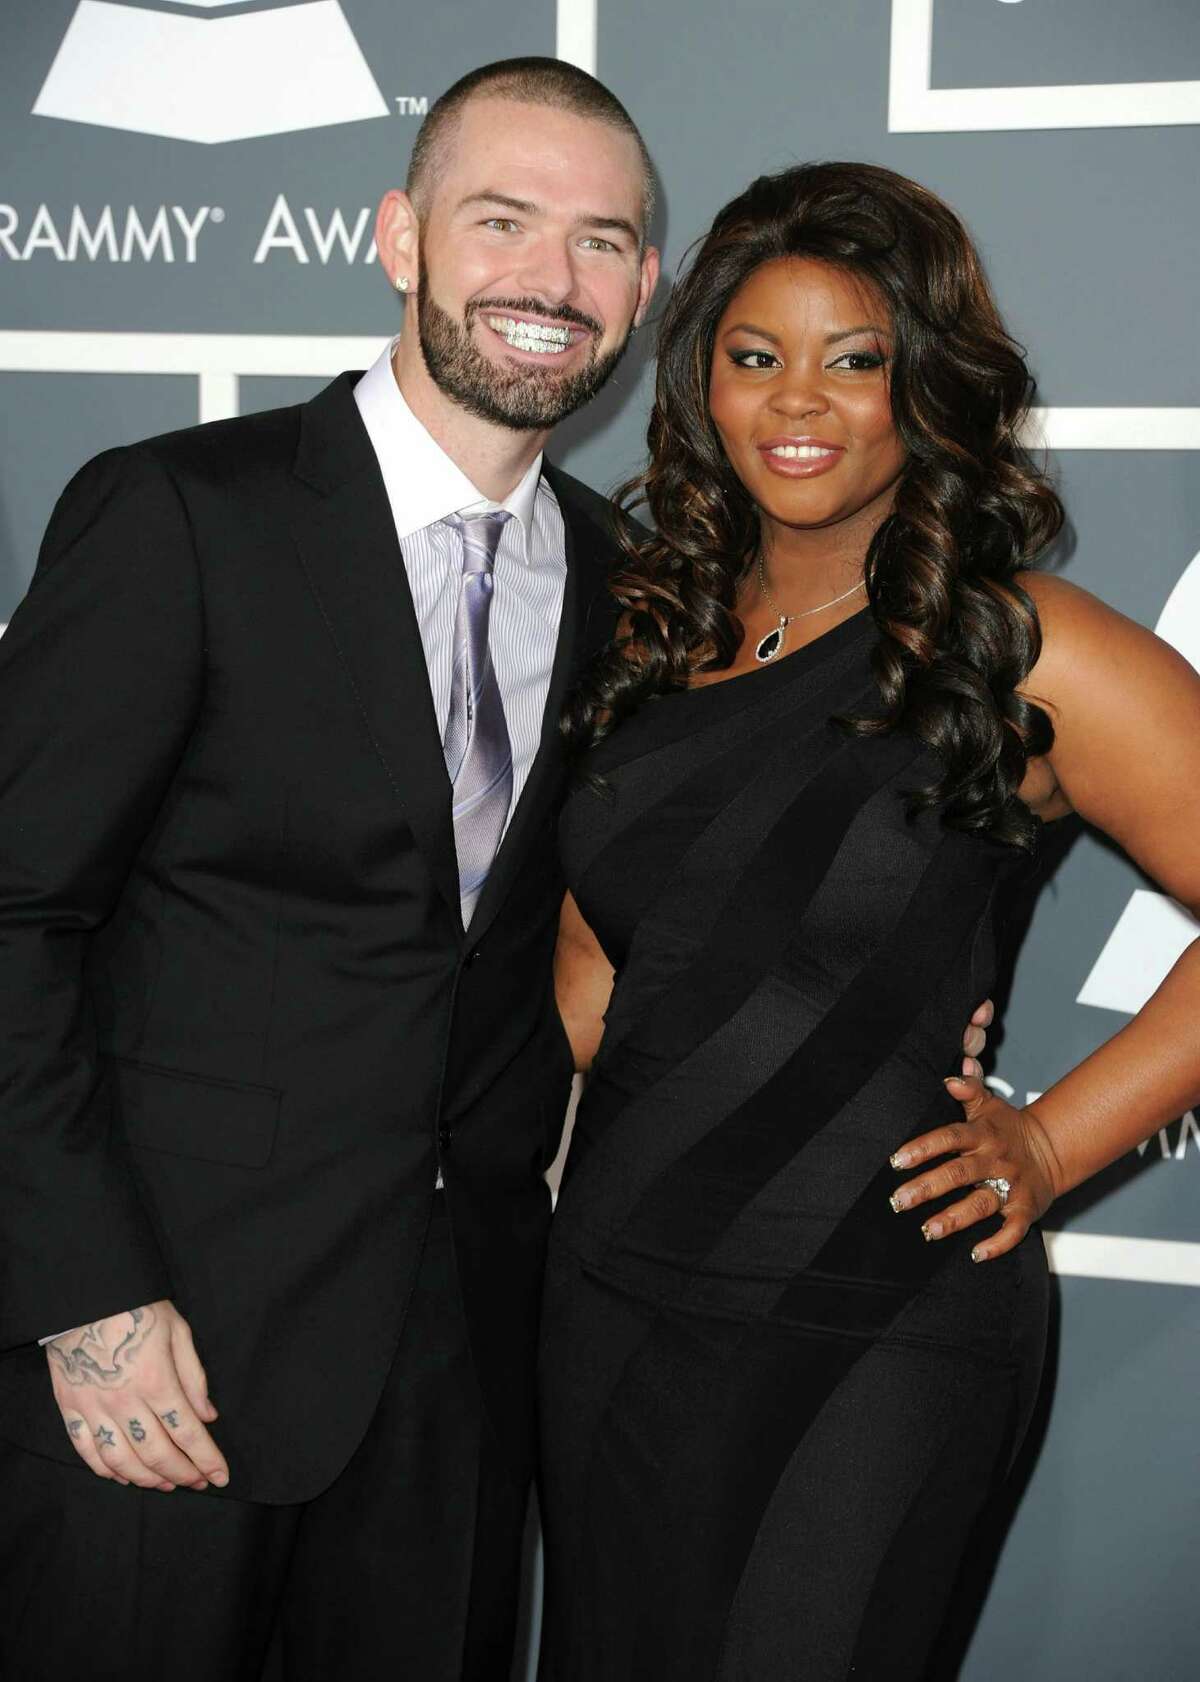 Rapper Paul Wall and wife Crystal are hip-hop and 